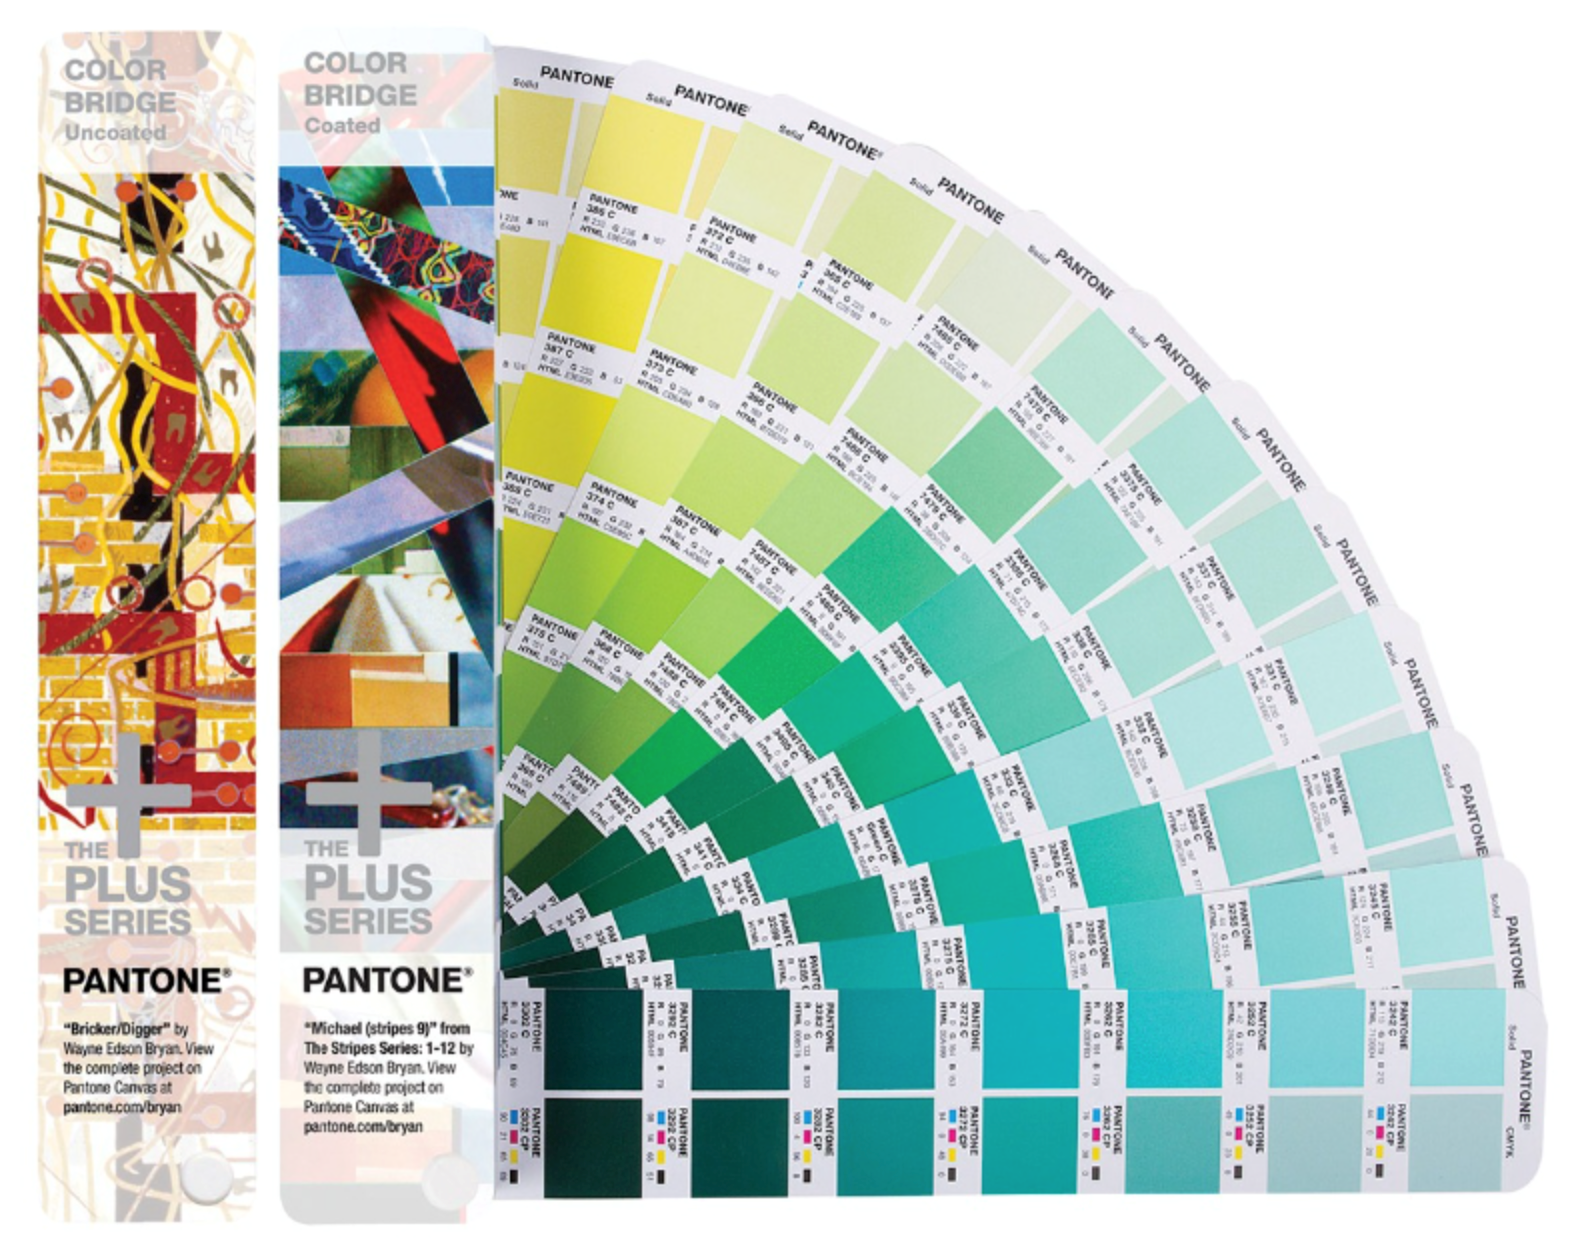 Getting The Best Results With PANTONE® Colors | X-Rite Blog